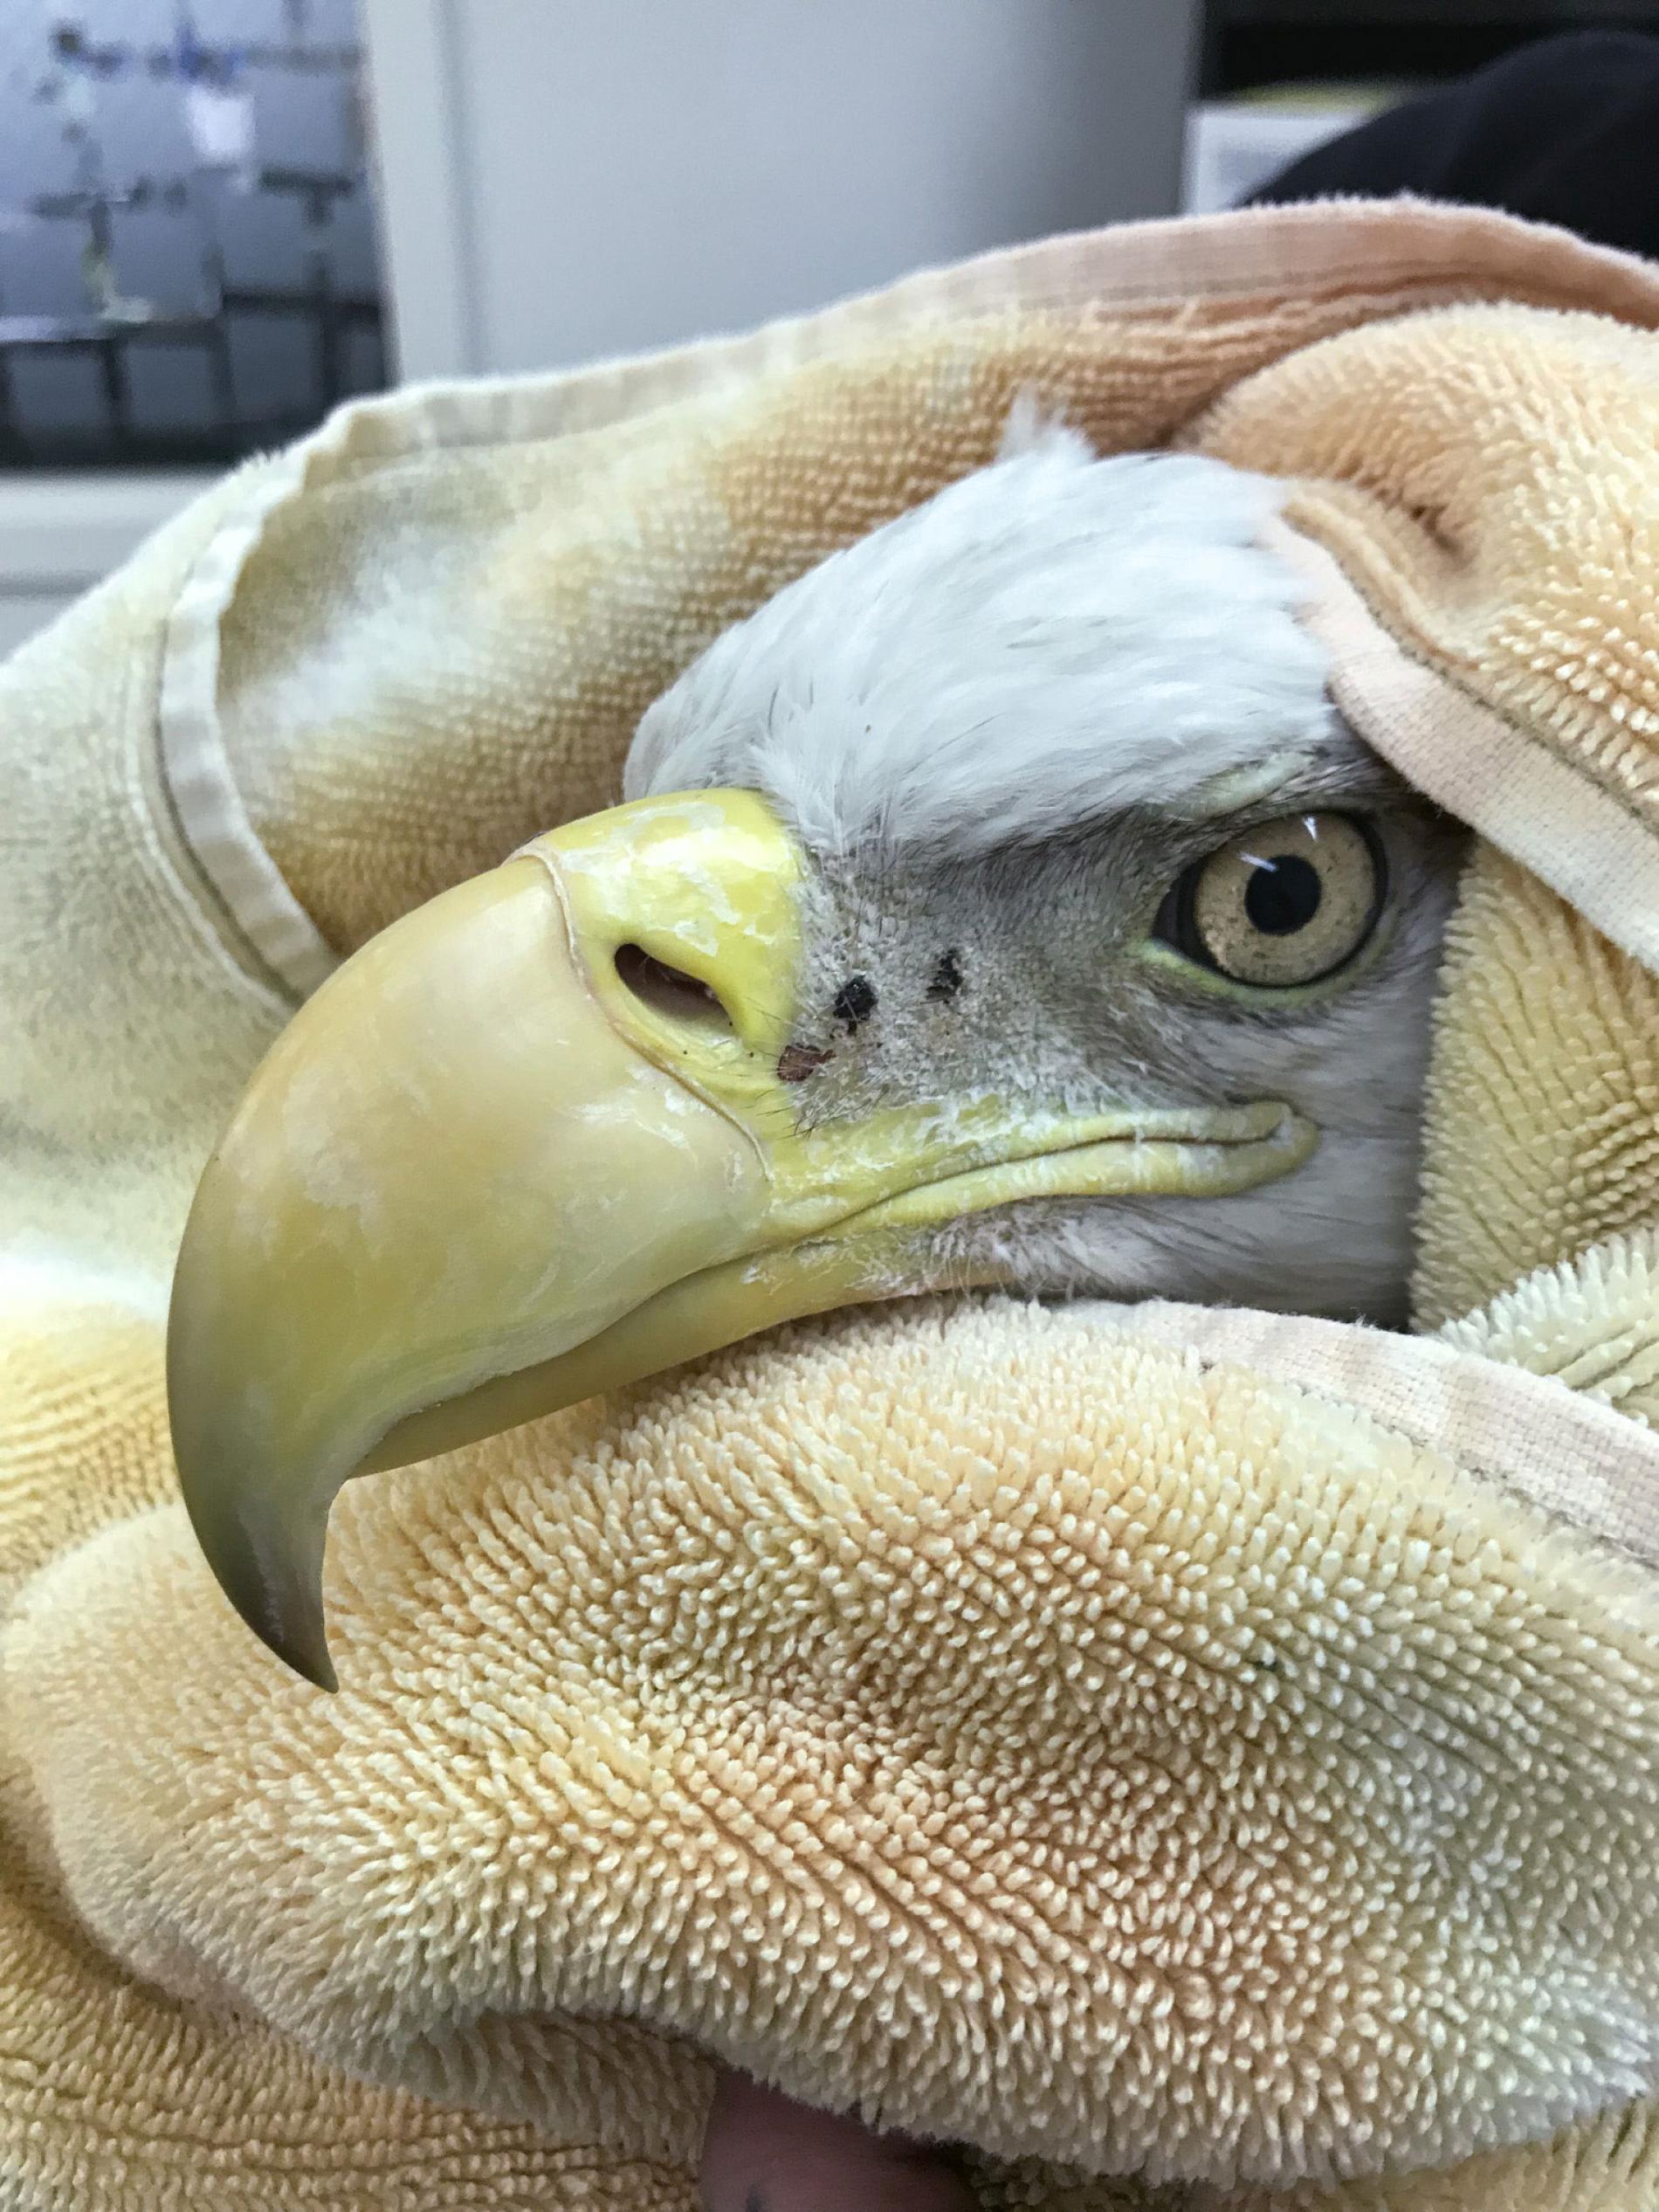 Poisoned Bald Eagle Highlights Lead Bullet Controversy